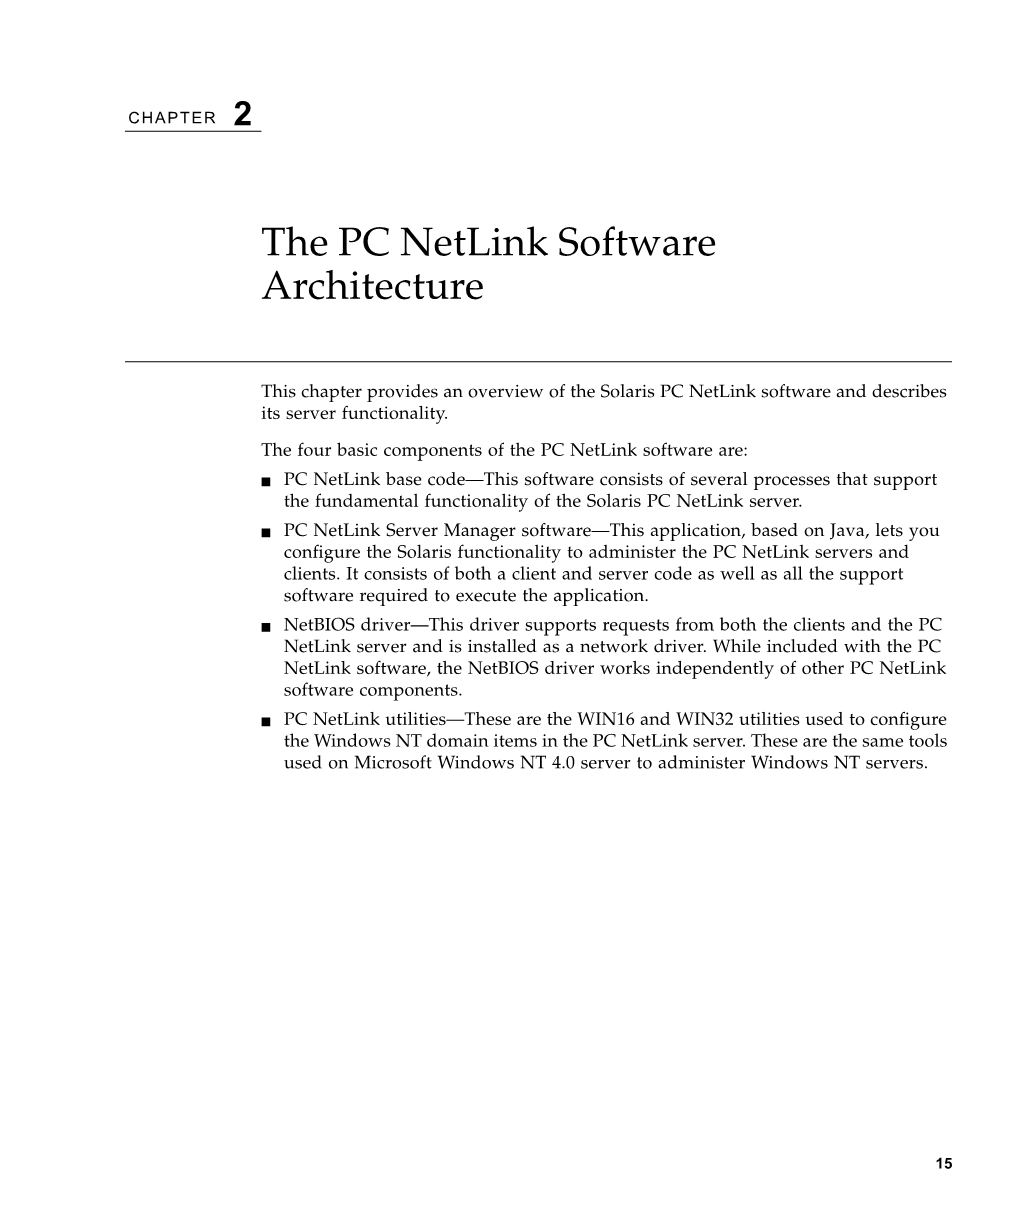 The PC Netlink Software Architecture